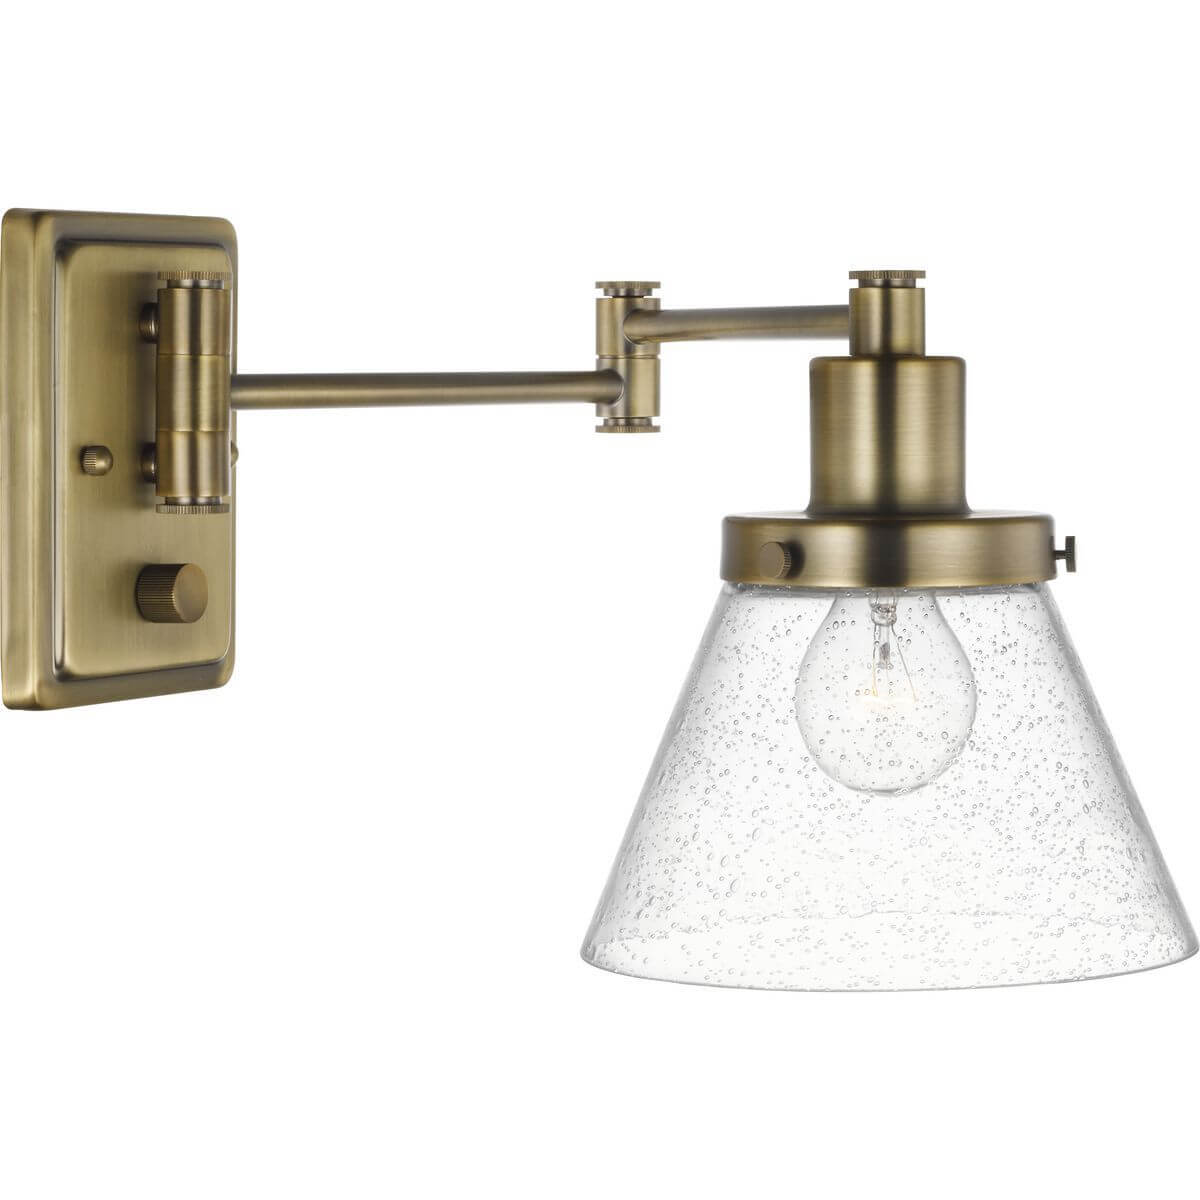 Progress Lighting Hinton 1 Light 10 inch Tall Swing Arm Wall Light in Vintage Brass with Clear Seeded Glass P710084-163